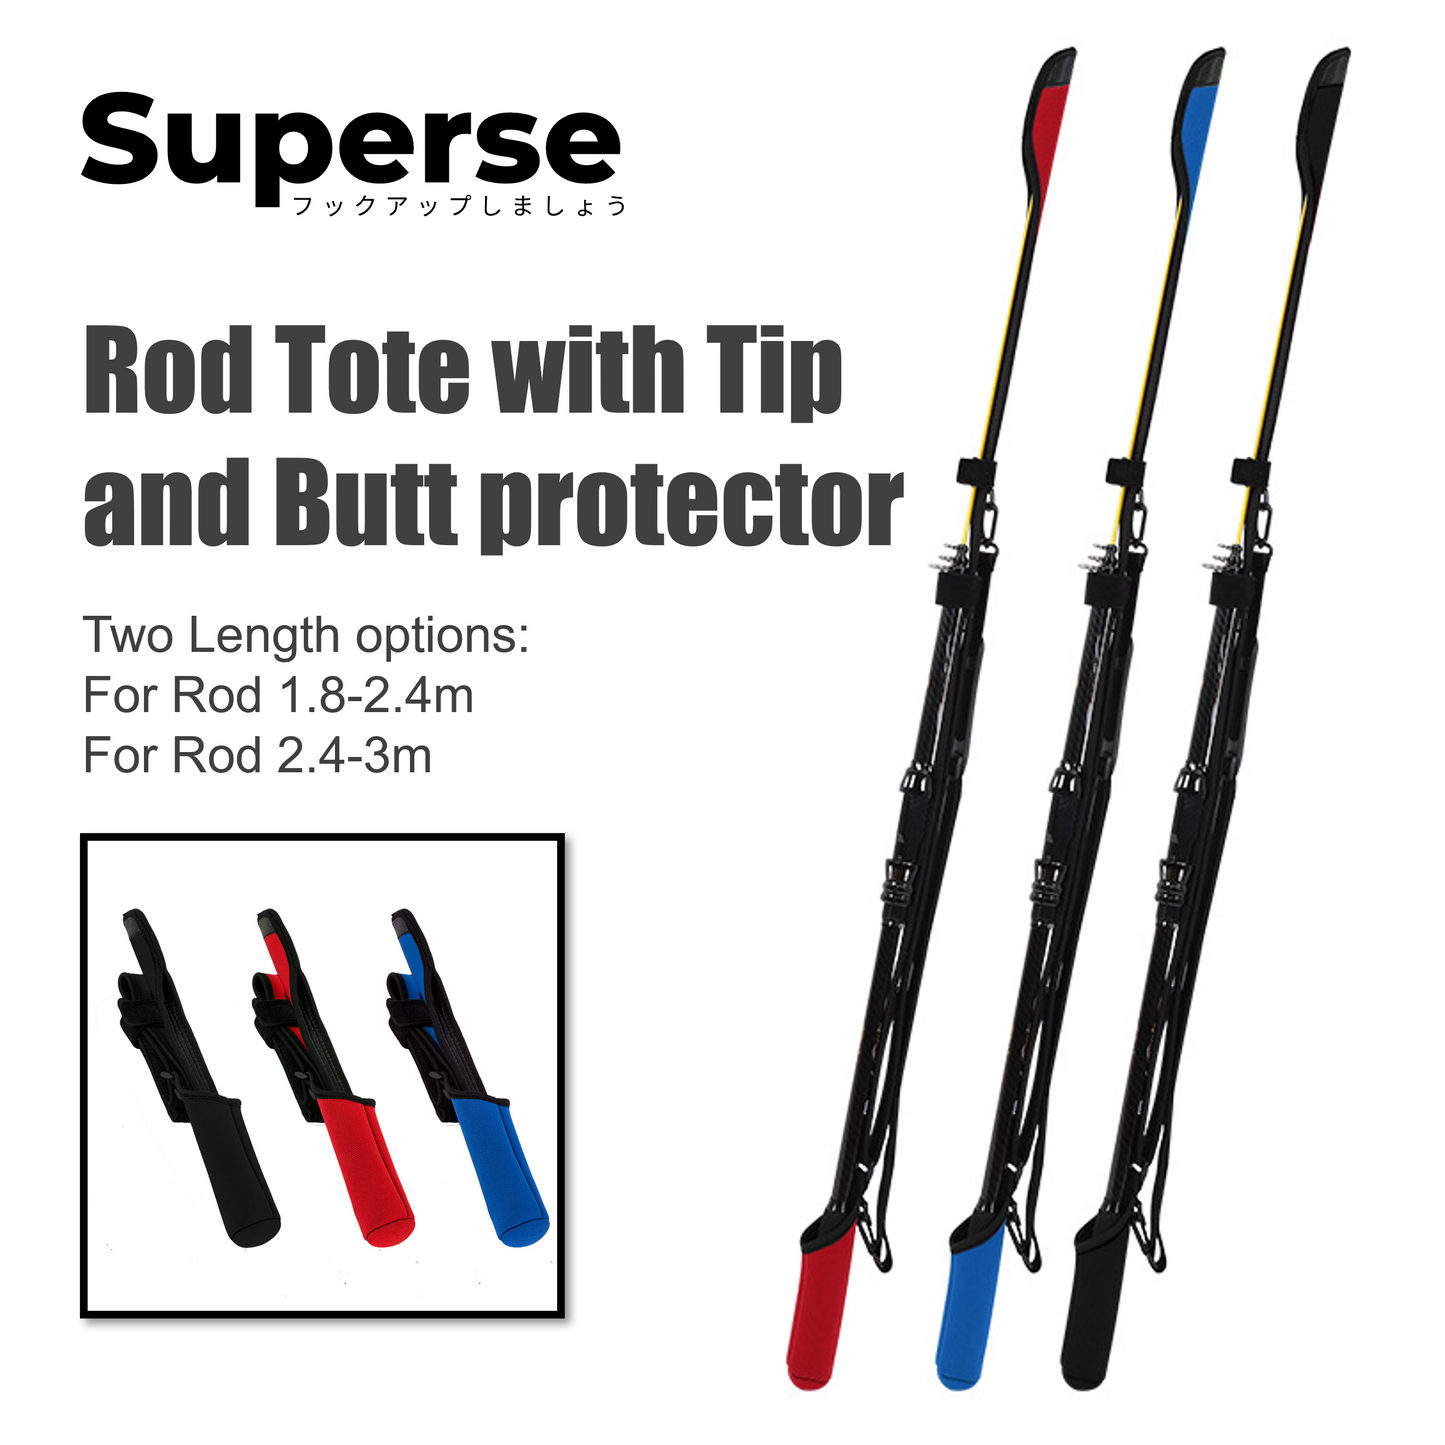 Superse Tip and Butt protector rod tote RC14